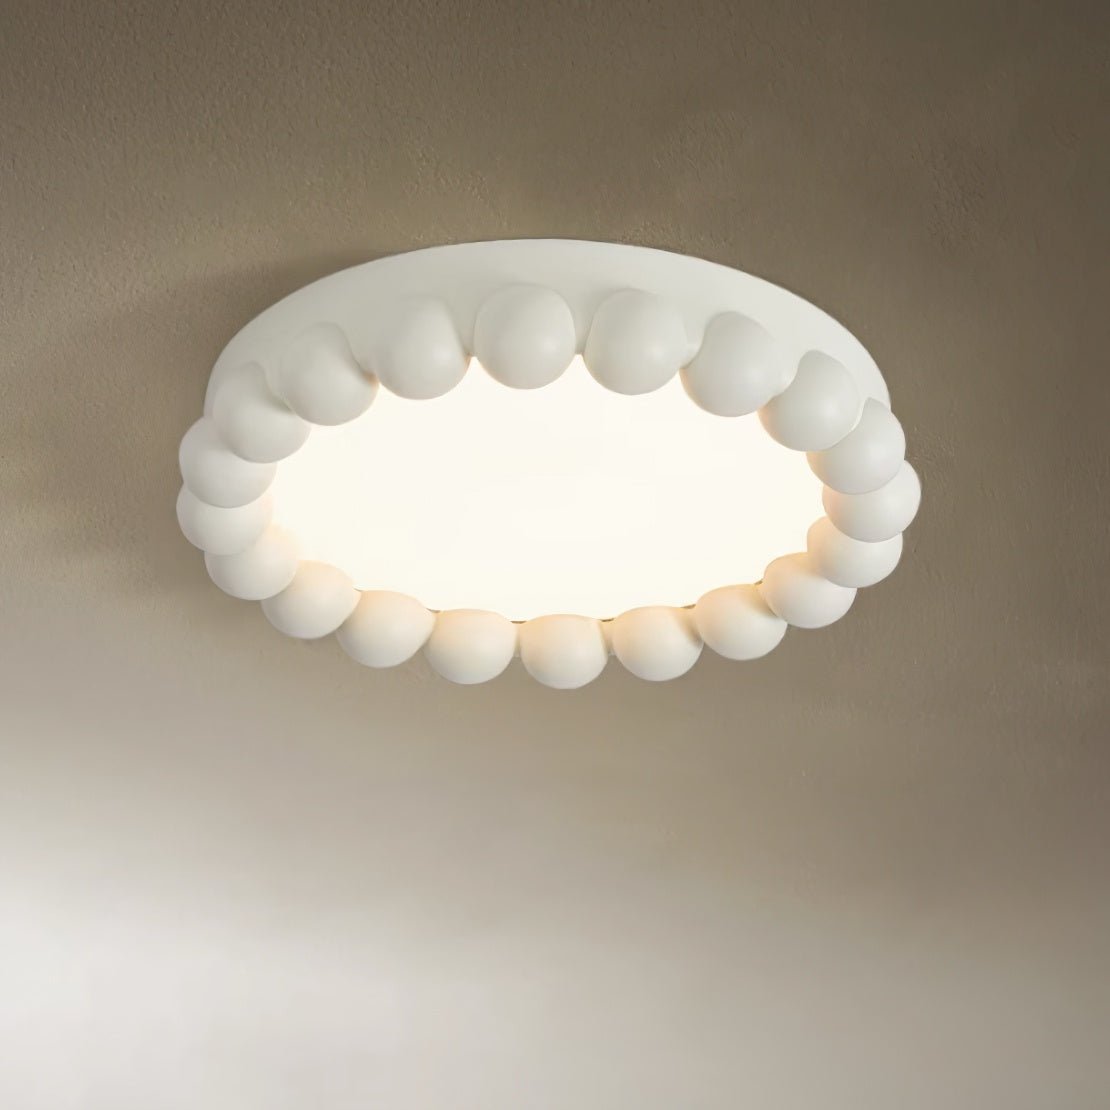 Ceiling Lamp in White Molina with 17.3-inch Diameter and 3.5-inch Height (or 44cm x 9cm), featuring Cool White Light.